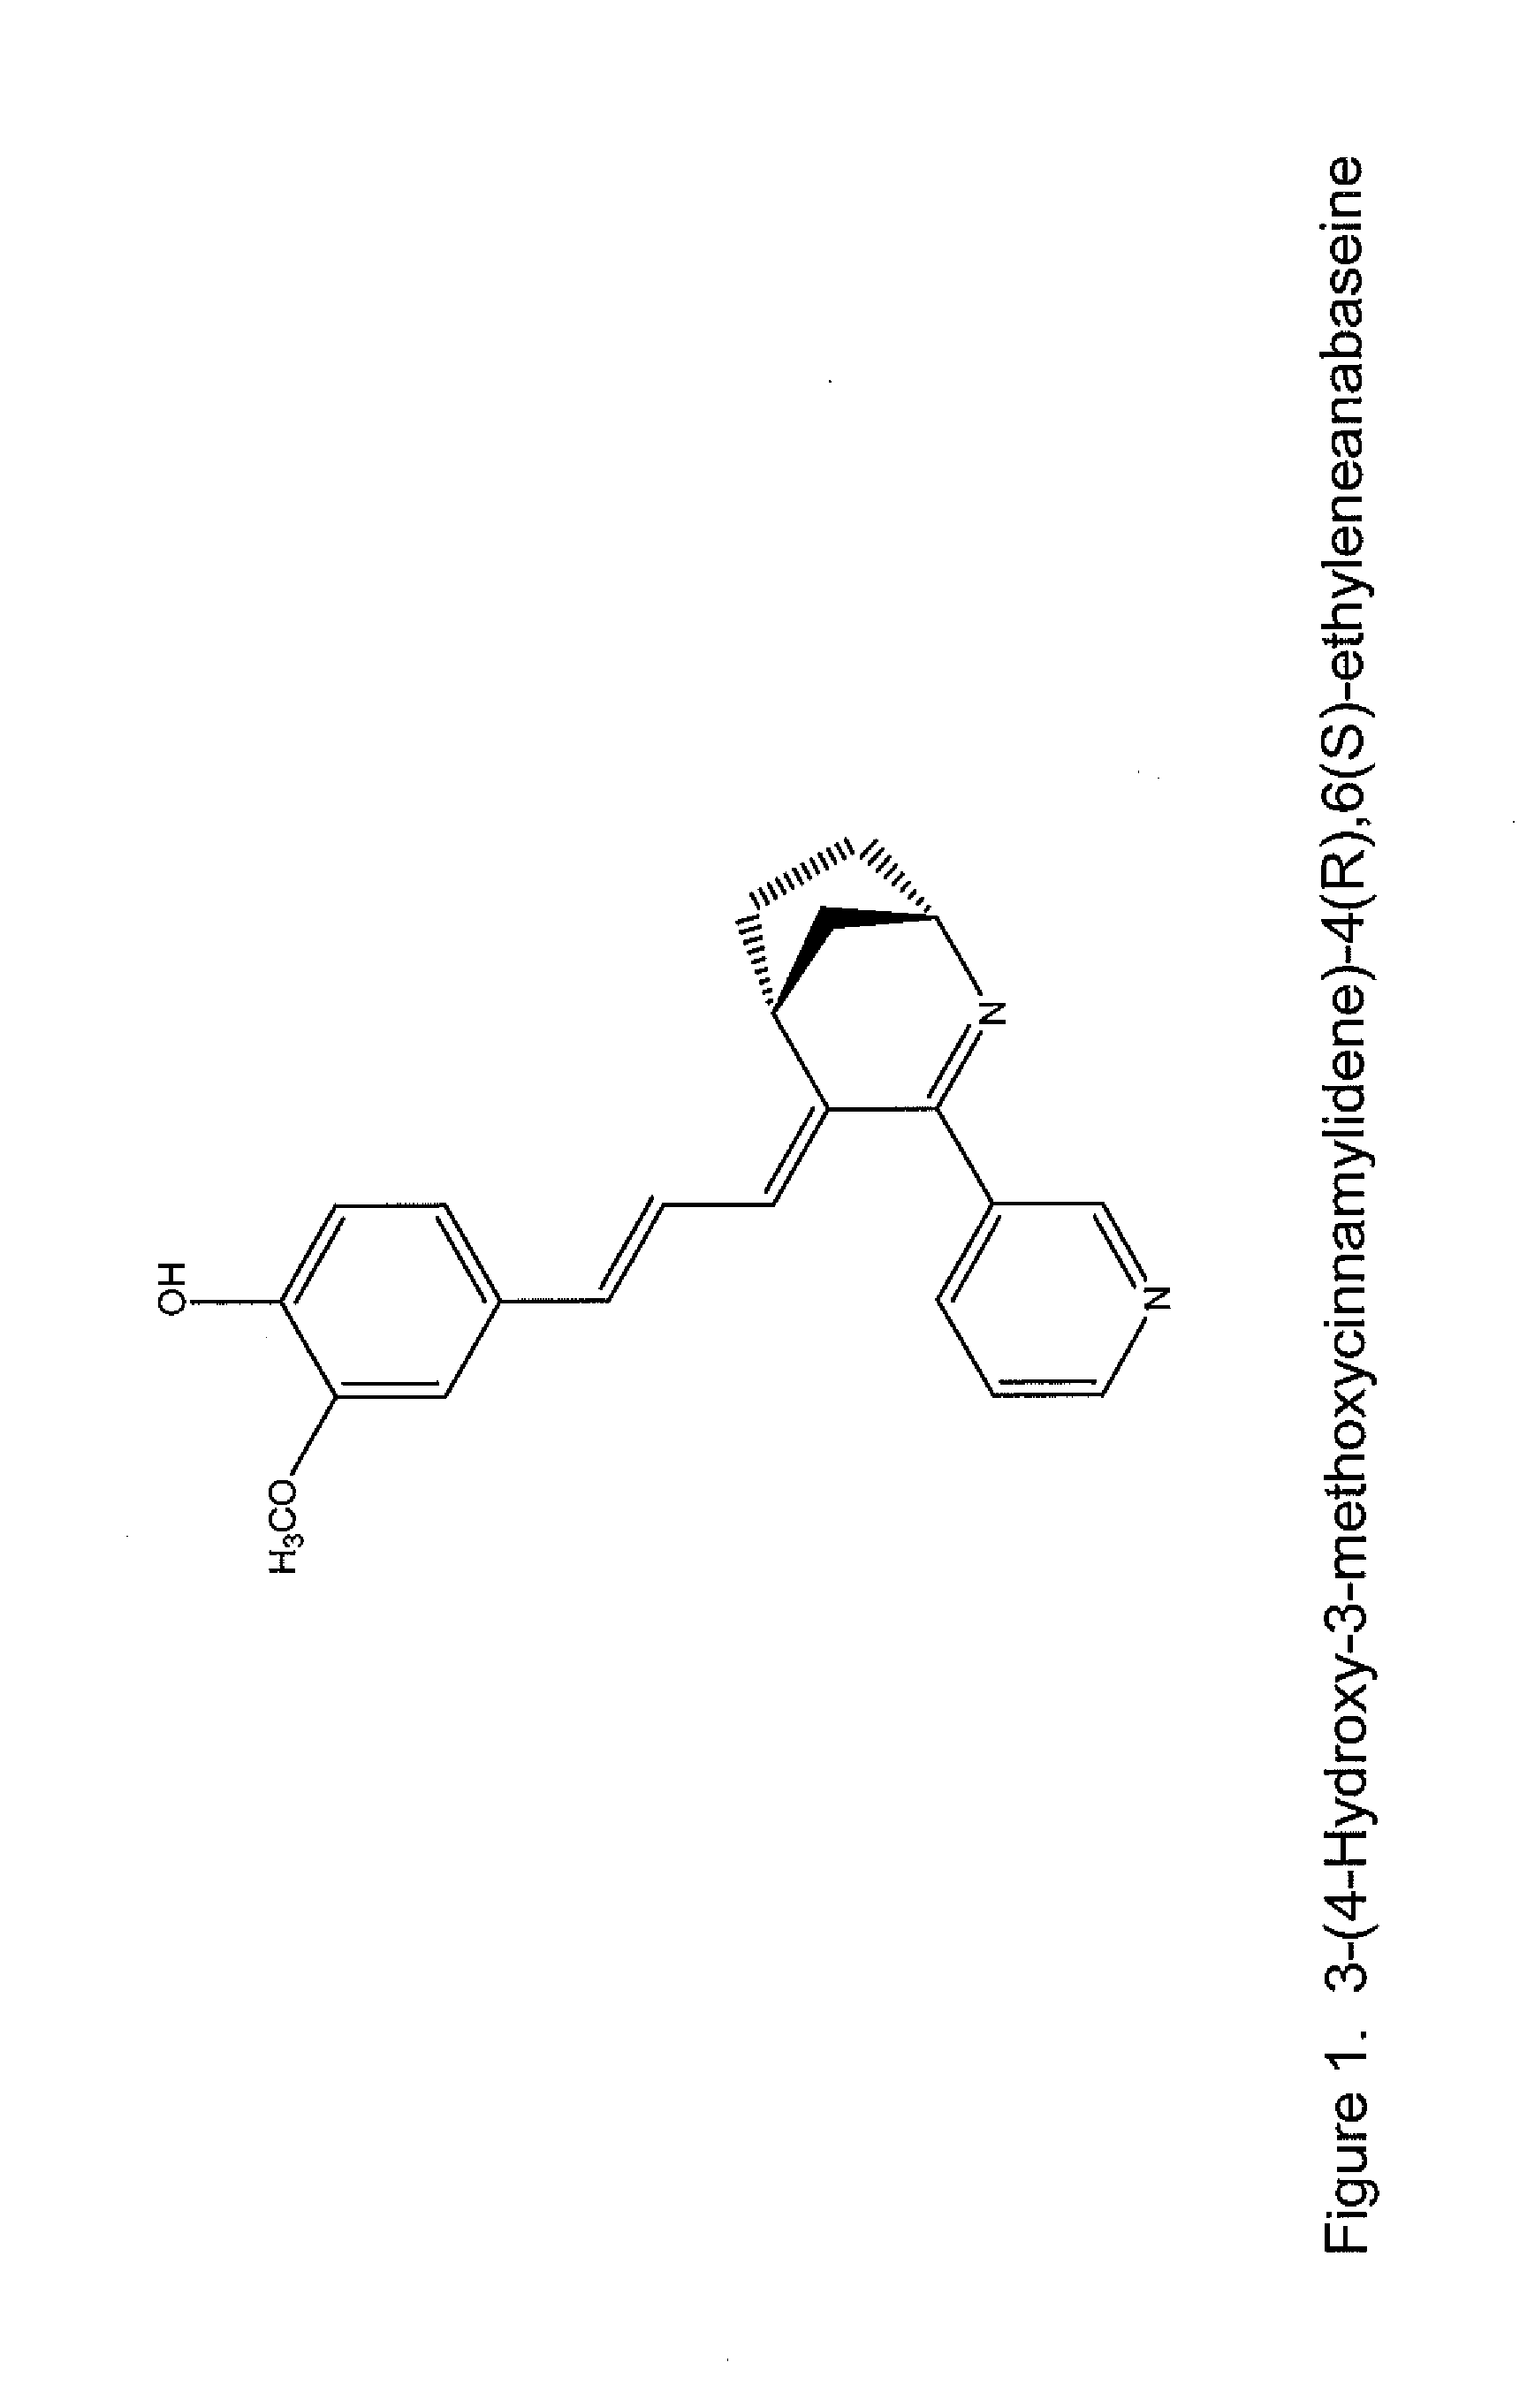 Nicotine receptor targeted compounds and compositions